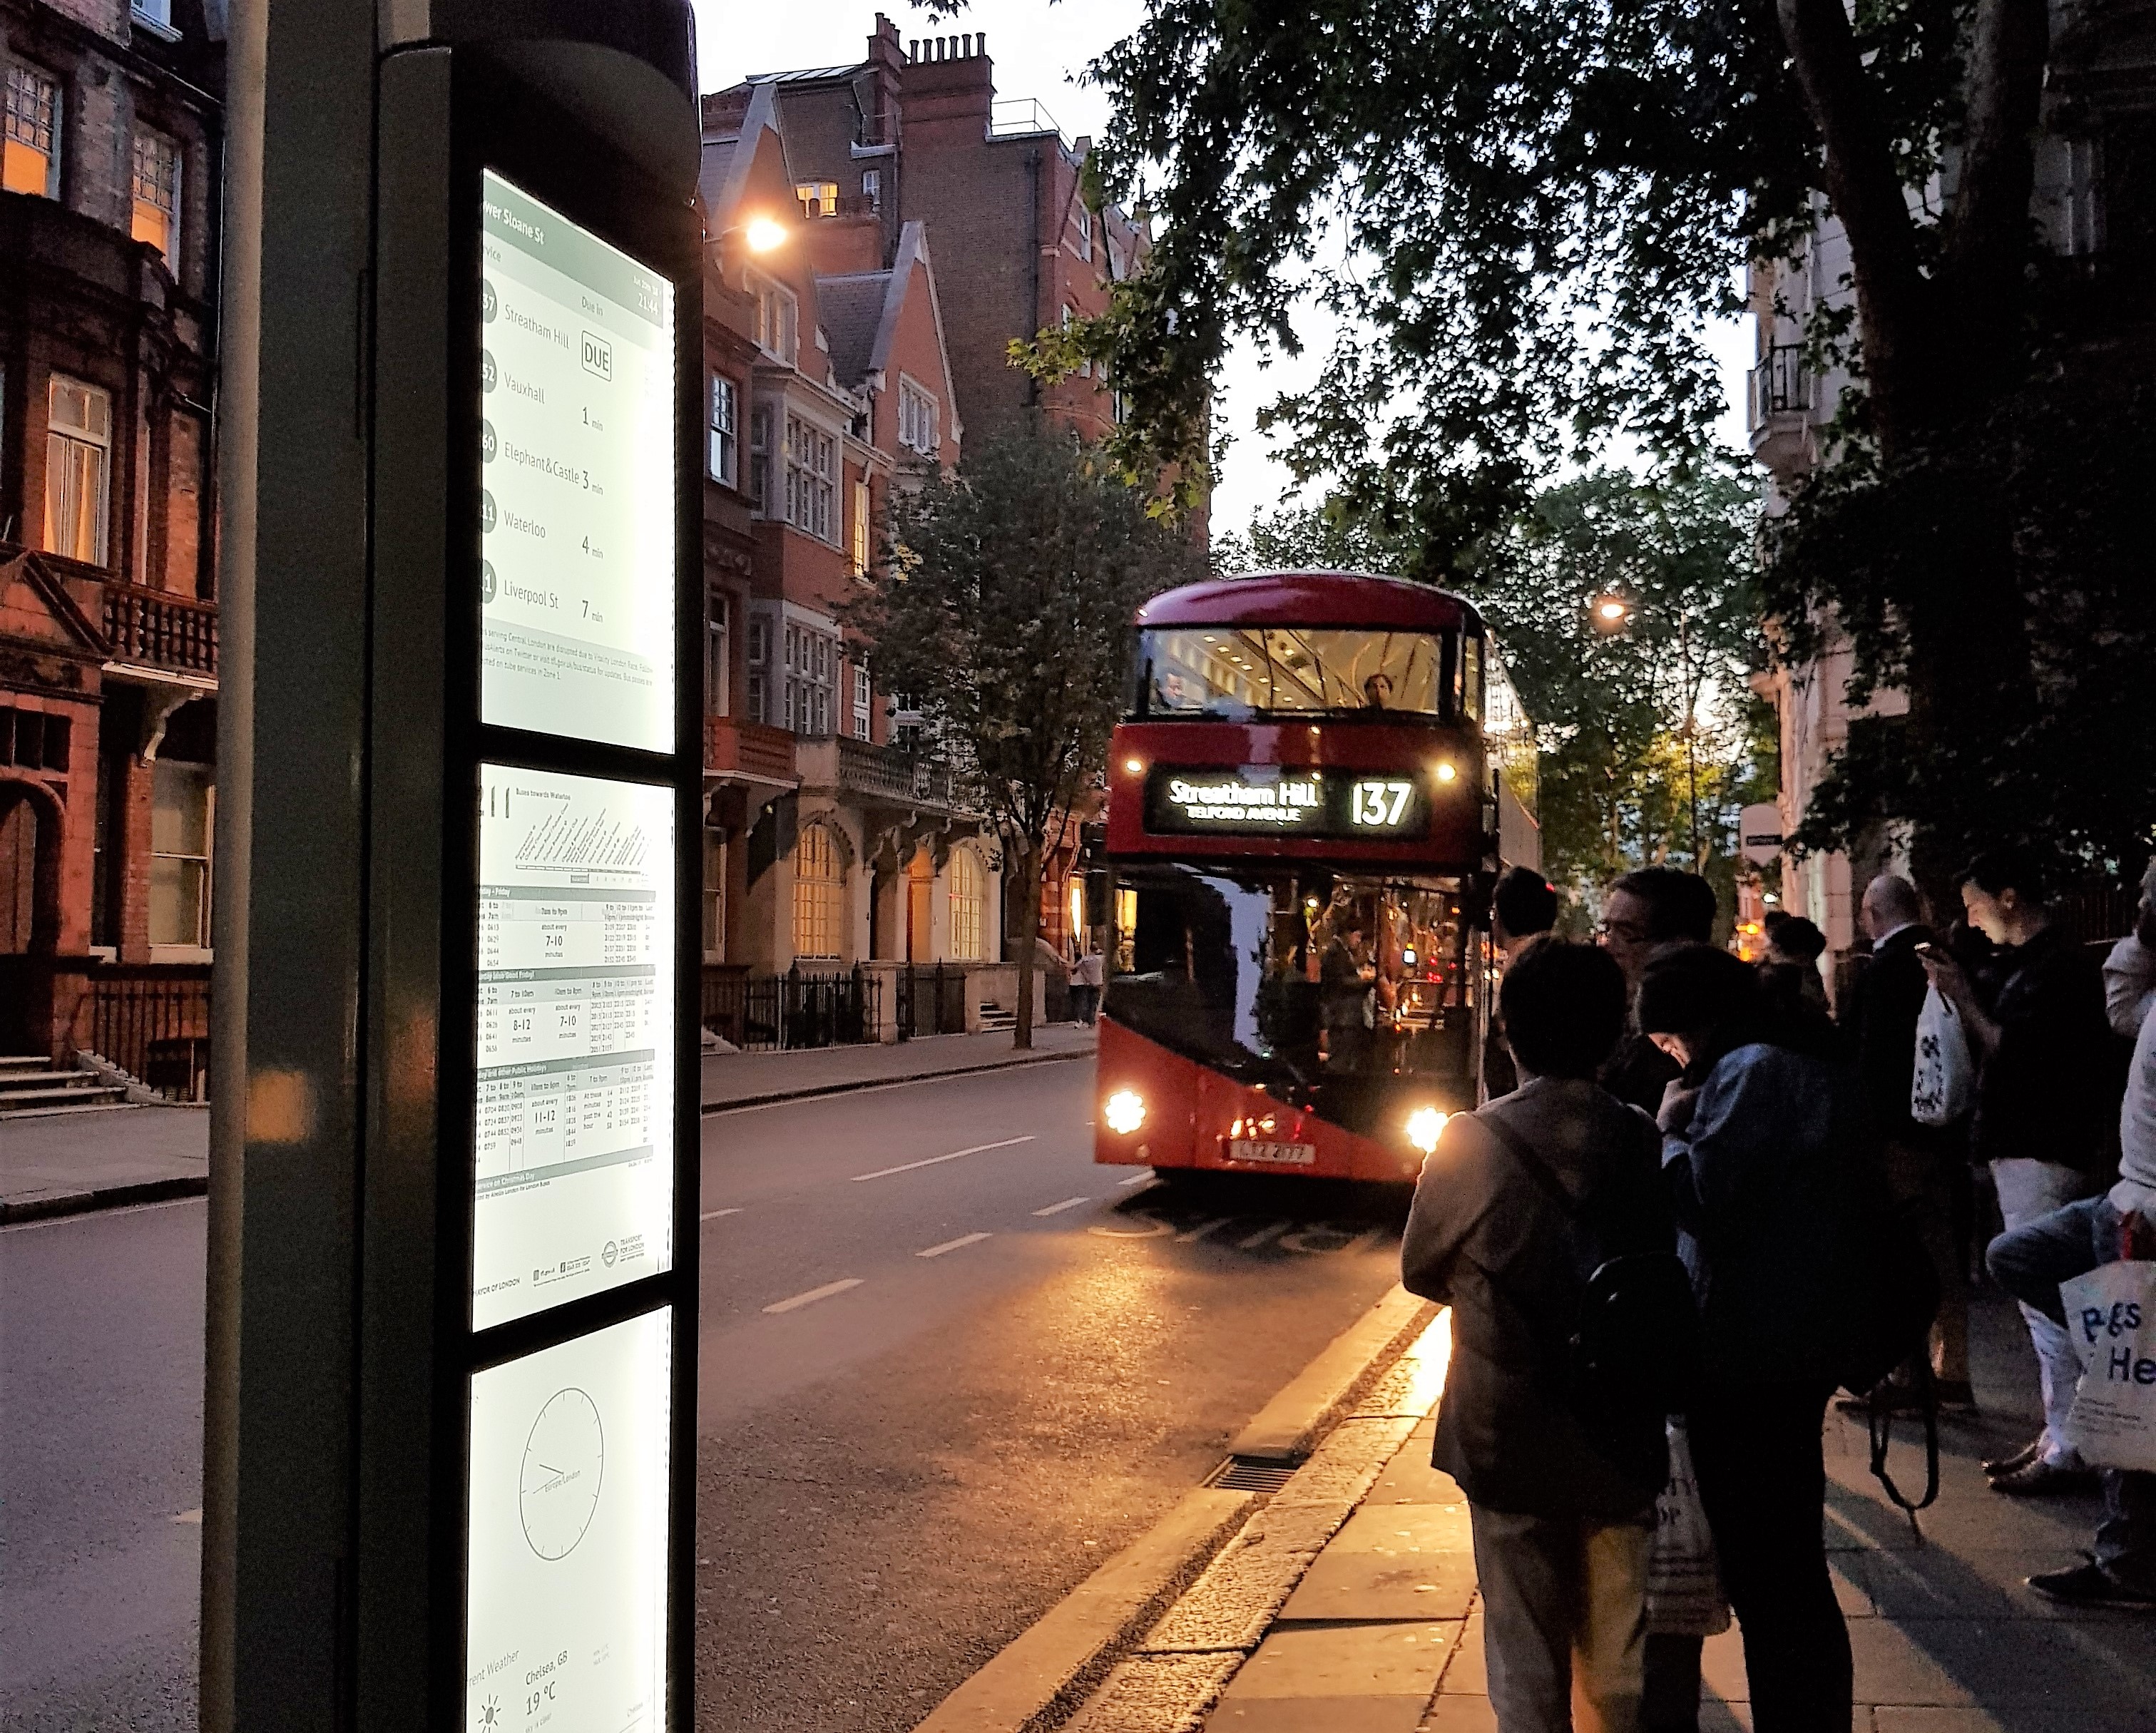 Papercast trials e-paper displays in London (Source: Papercast)